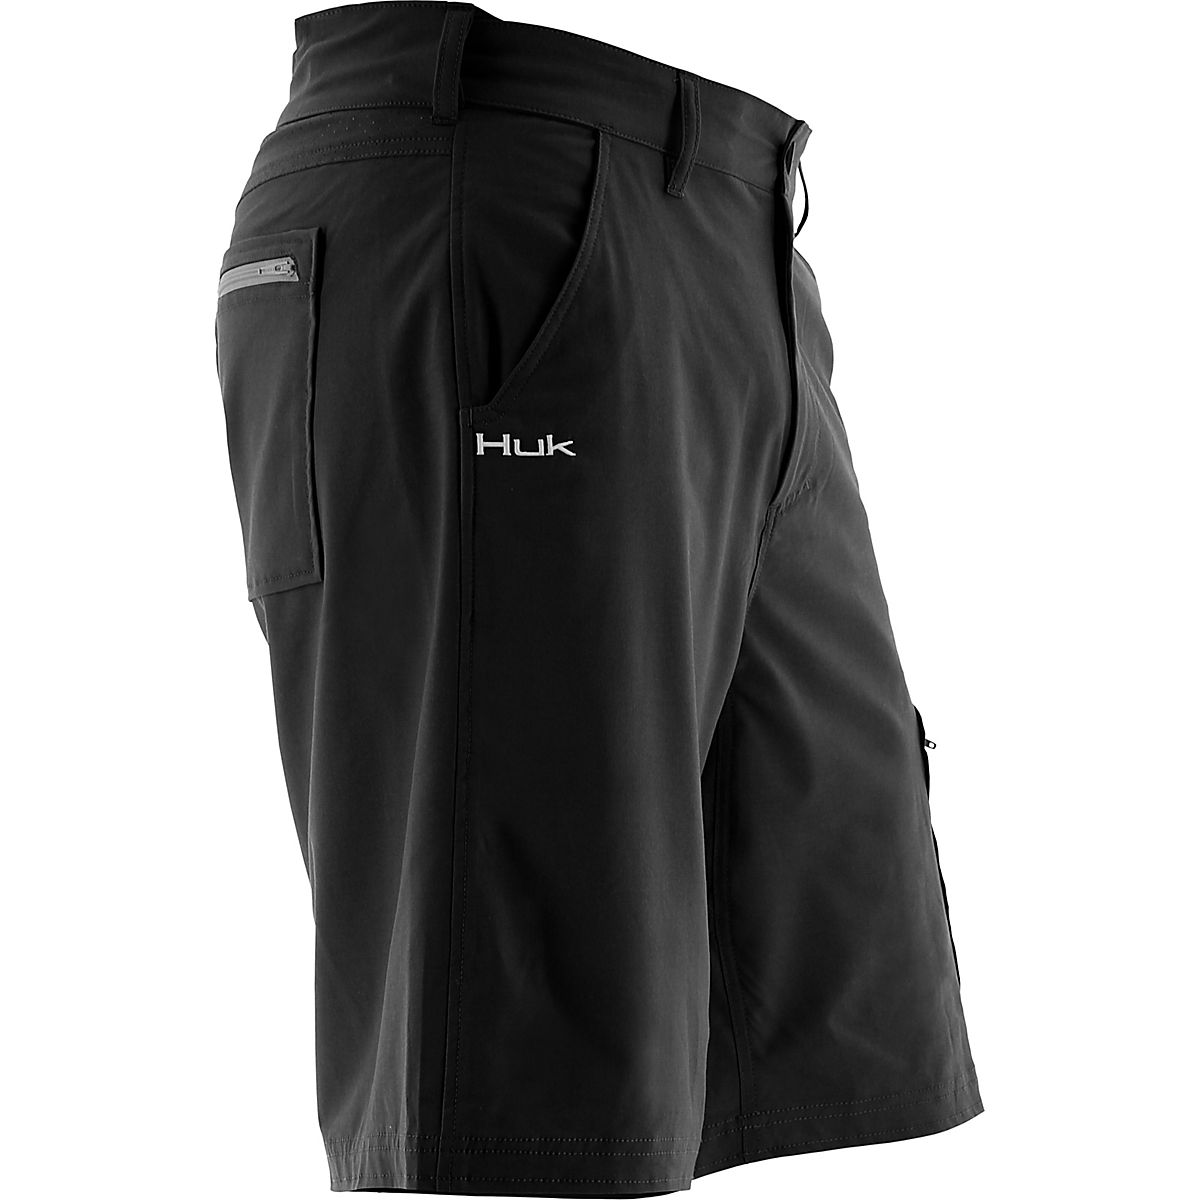 New Huk Men's XL Next Level Quick-Drying Performance, 43% OFF